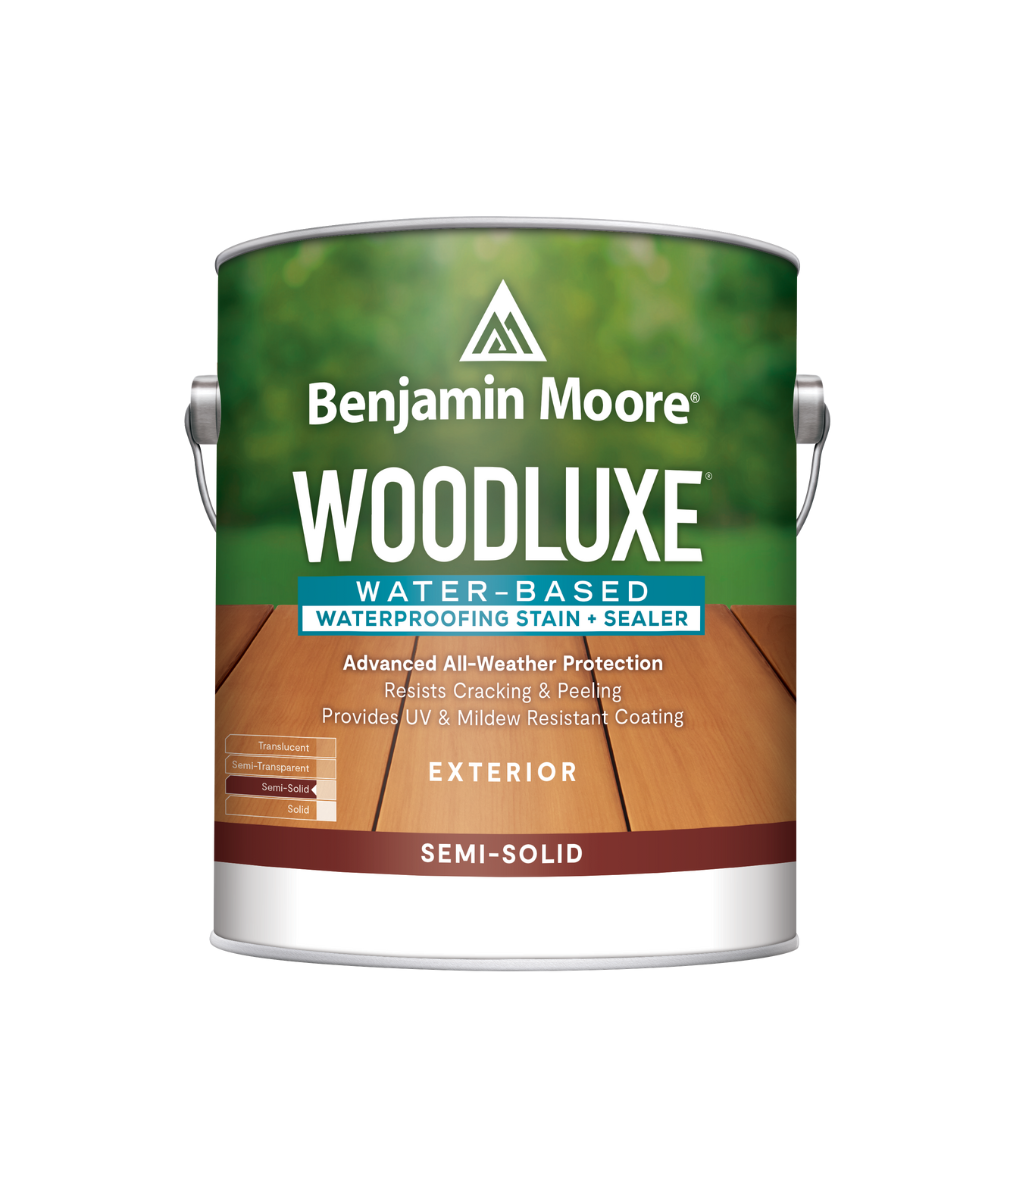 Benjamin Moore Woodluxe® Water-Based Semi-Solid Exterior Stain Half Pint Sample available at JC Licht.